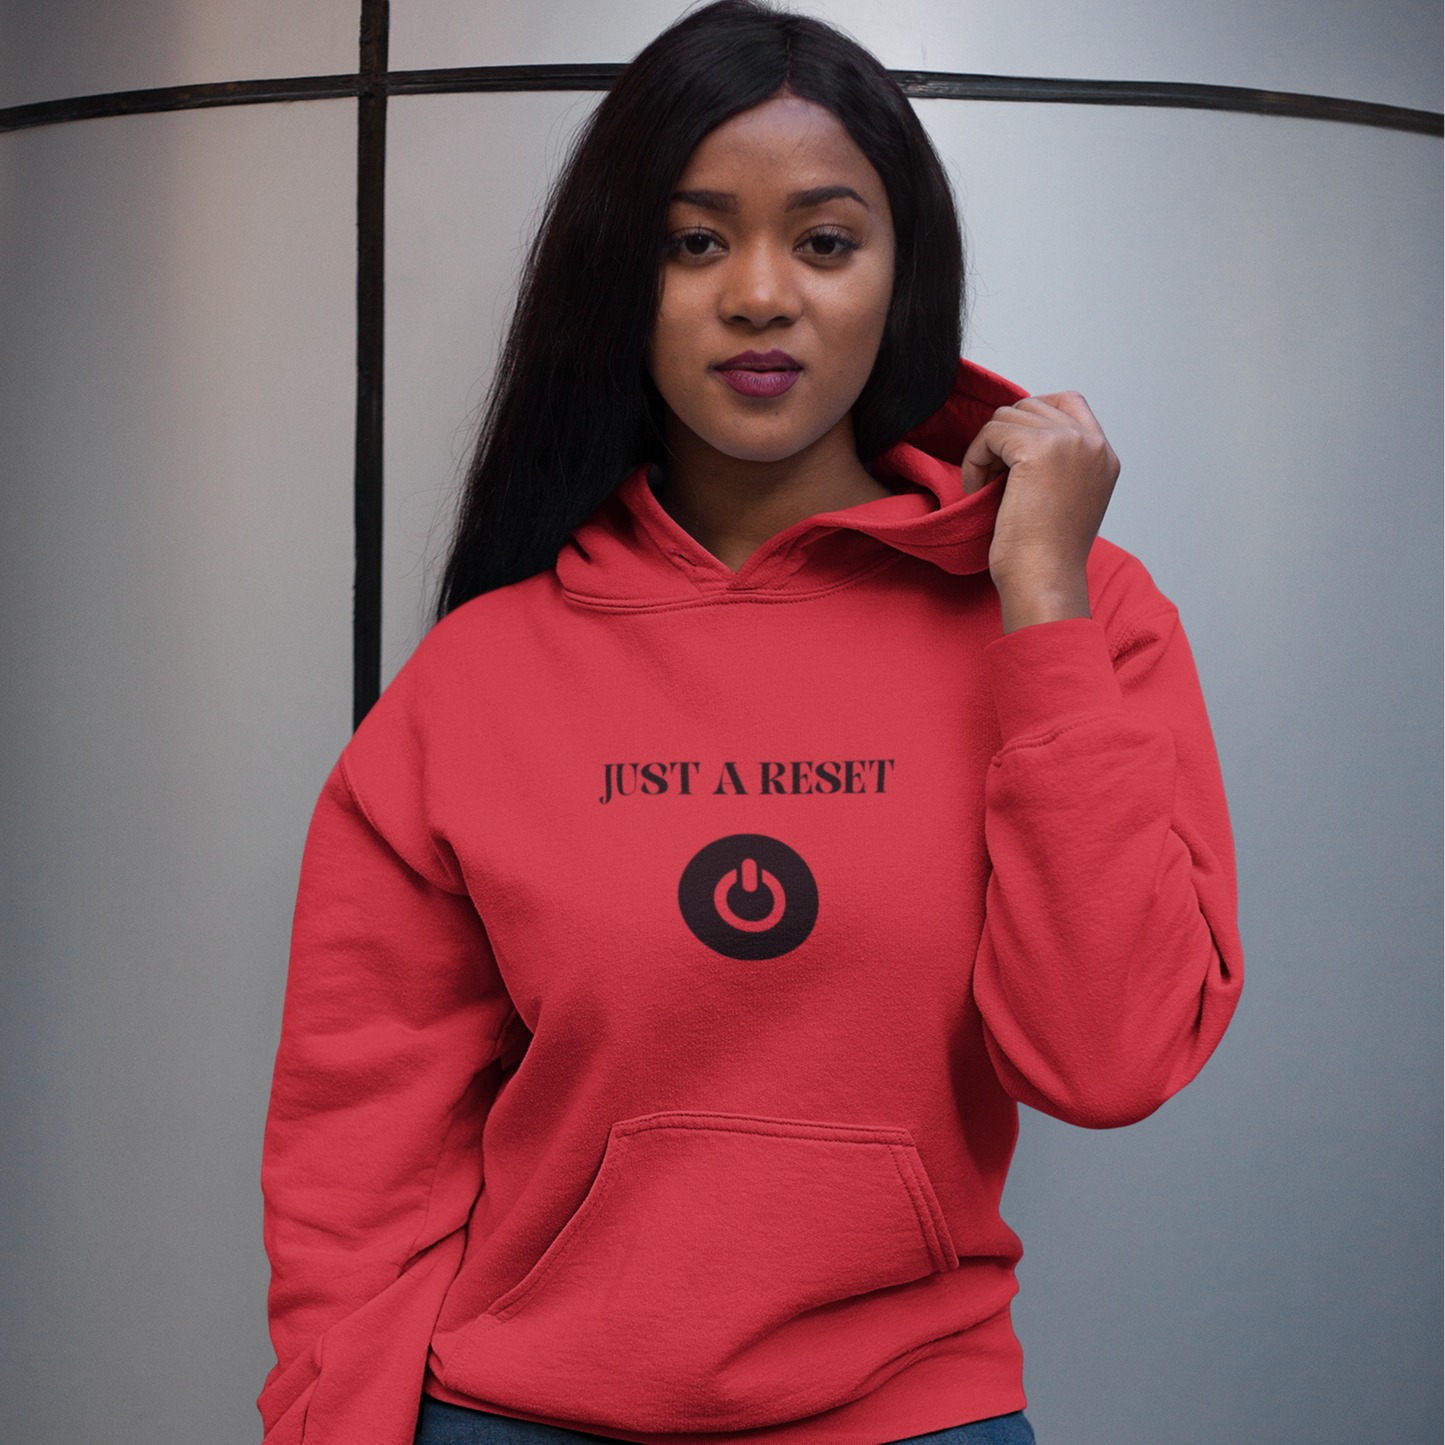 Just a reset hooded sweatshirt gift, hoodie gift to celebrate mental wellbeing, sweatshirt gift for friends and family